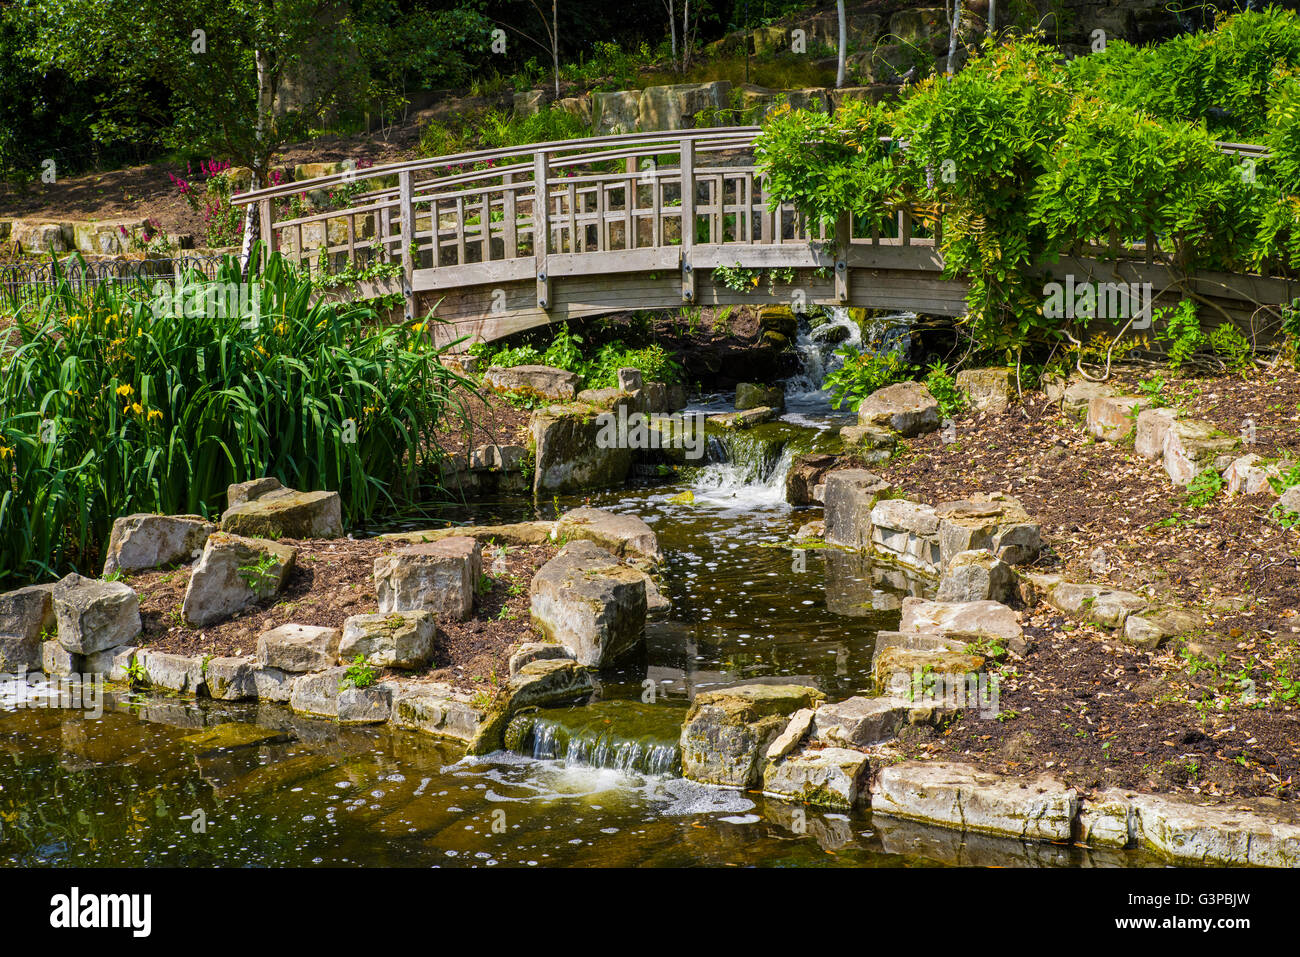 A view of the beautiful Japanese Garden Island located in Queen Marys Gardens in Regents Park, London. Stock Photo